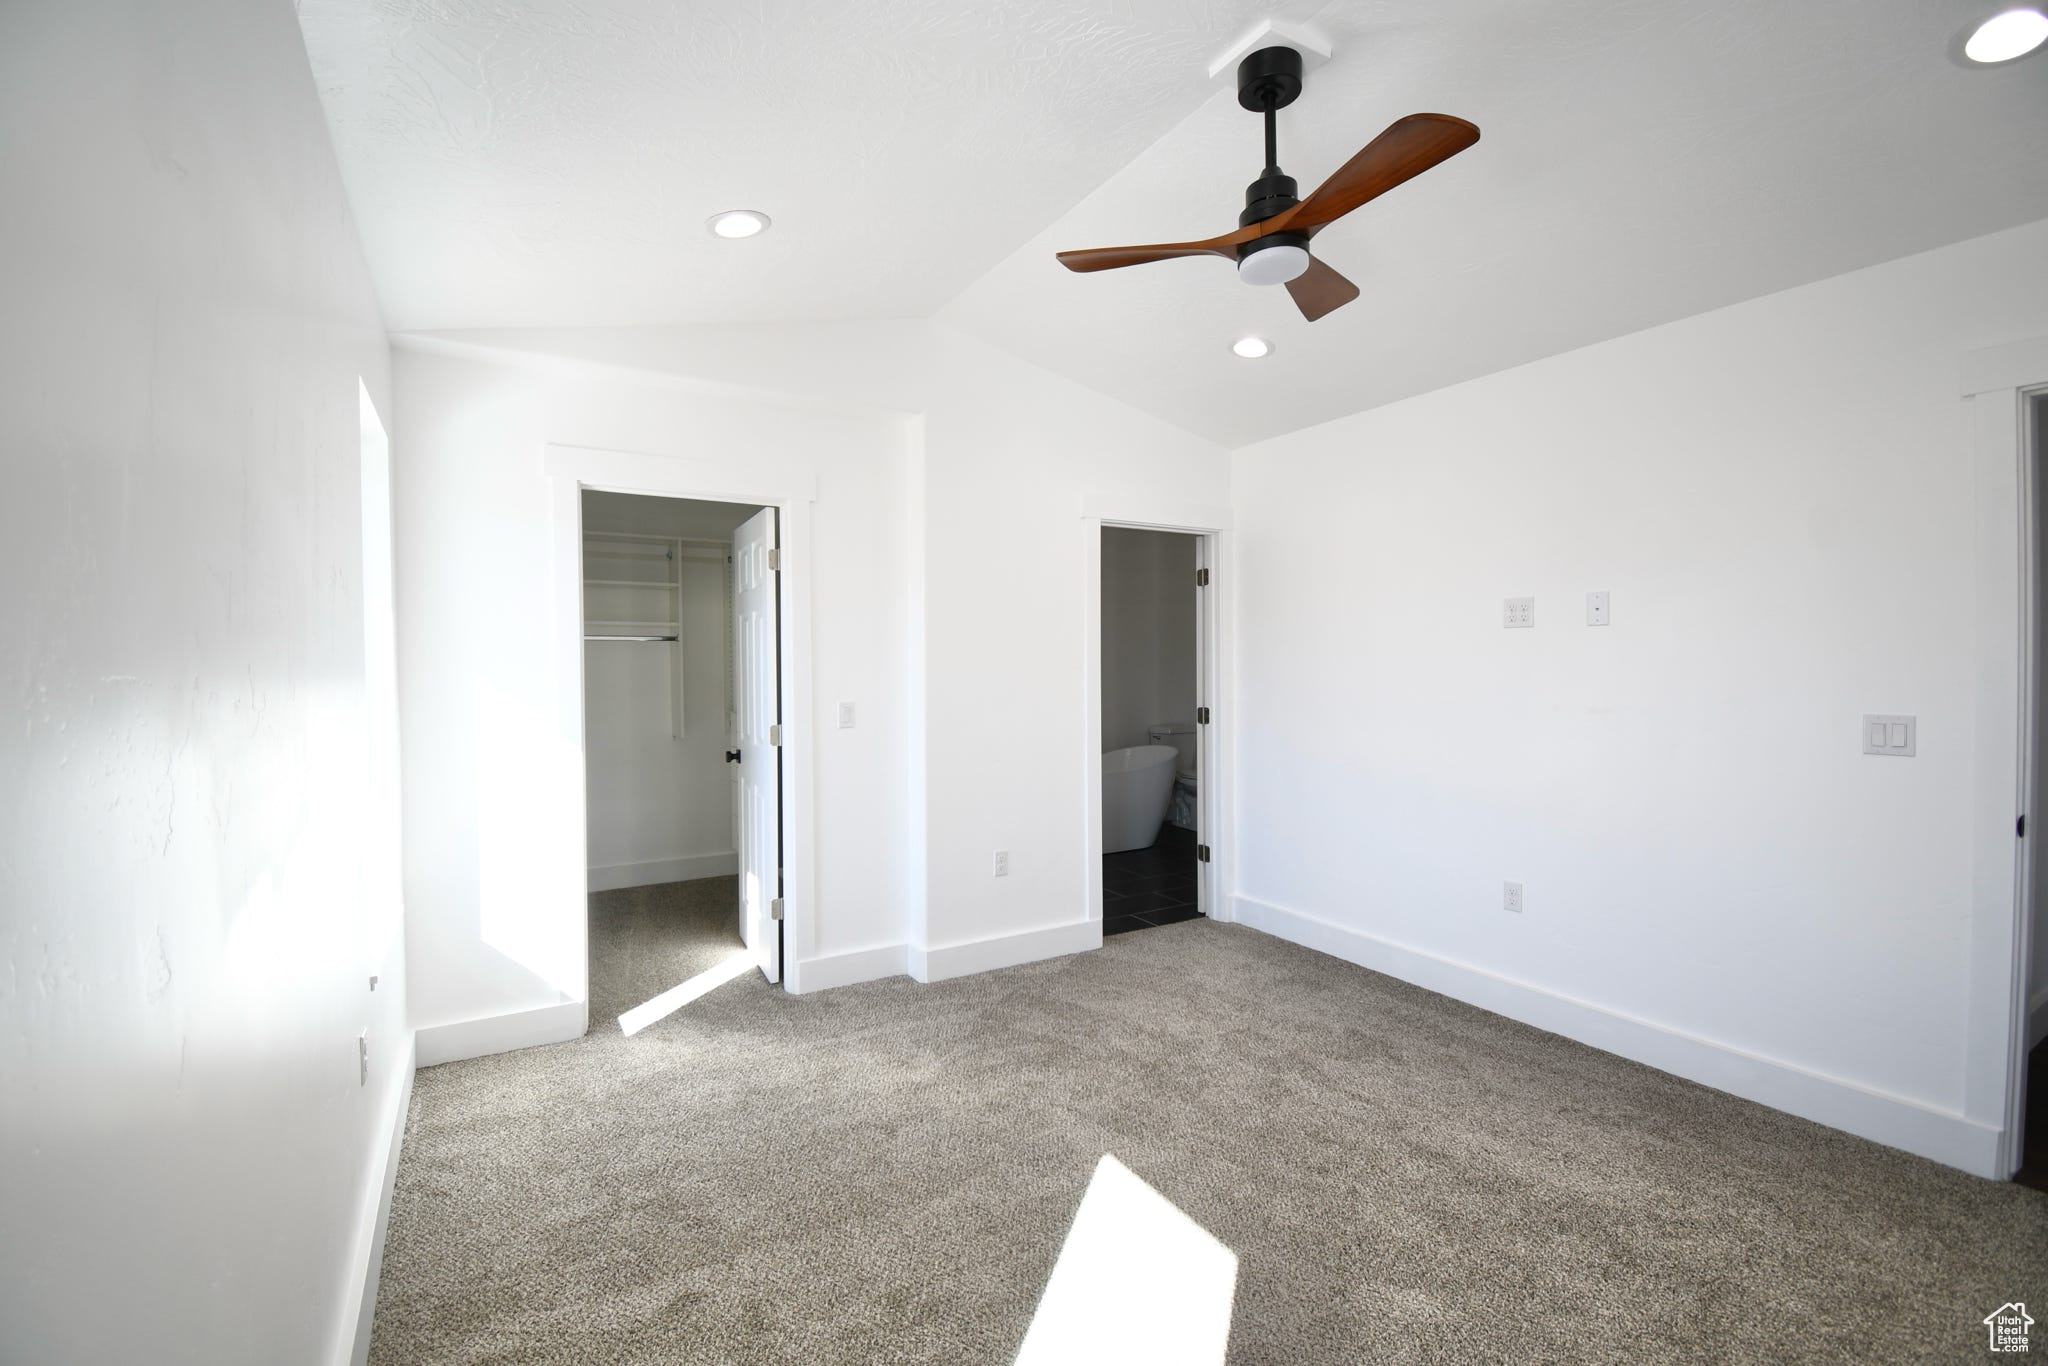 Unfurnished bedroom with connected bathroom, light colored carpet, lofted ceiling, a closet, and ceiling fan